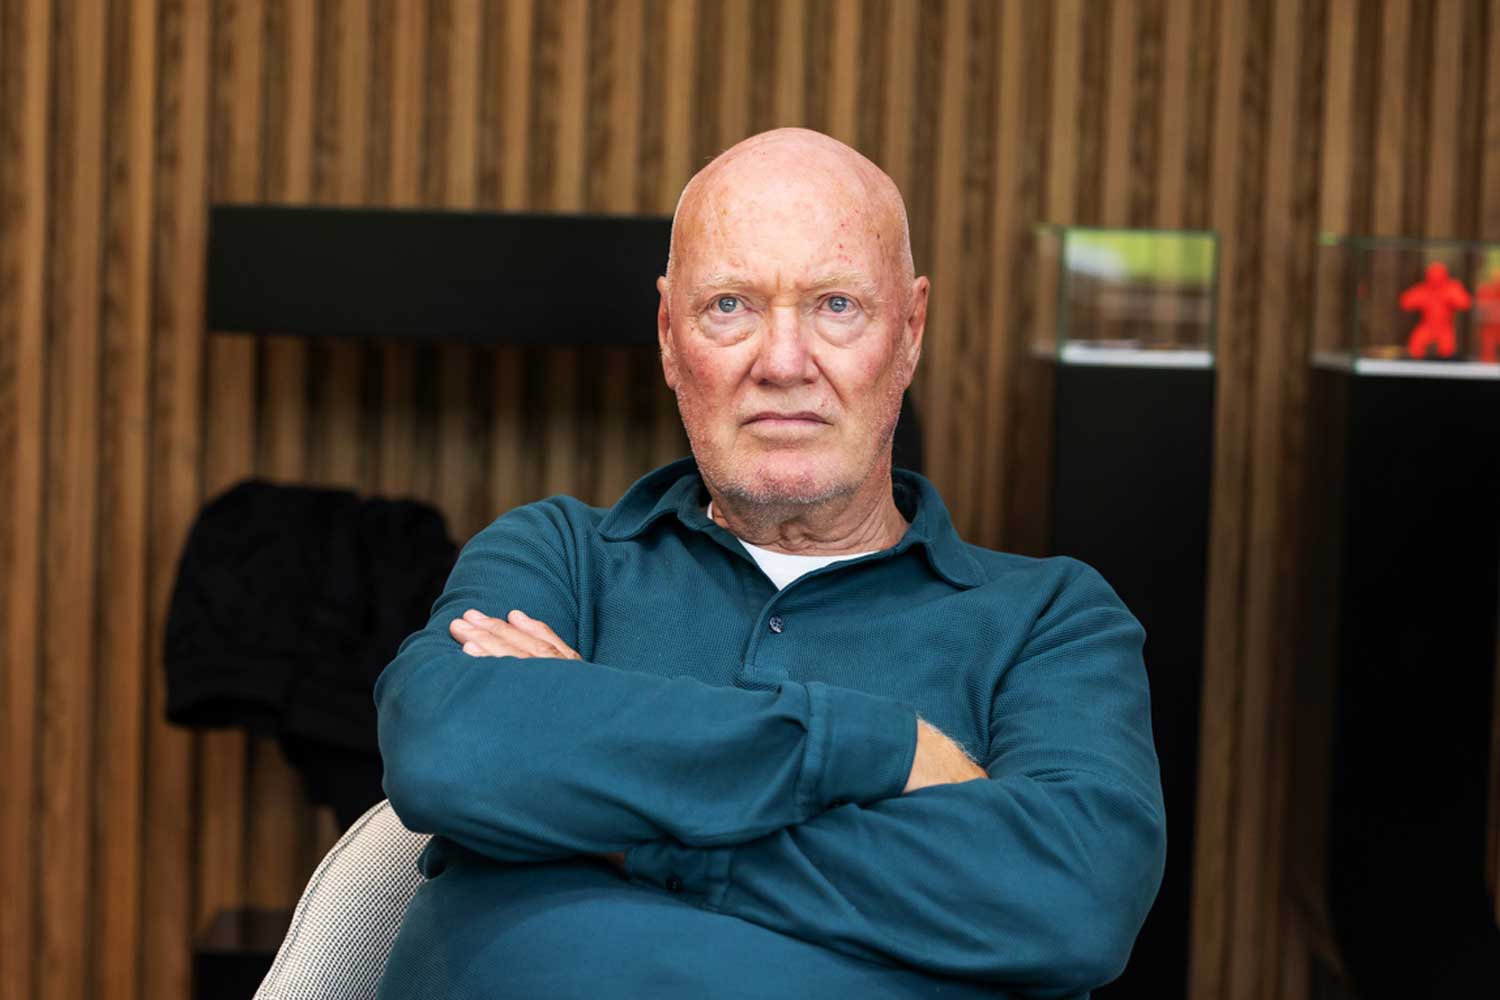 The industry icon Jean-Claude Biver